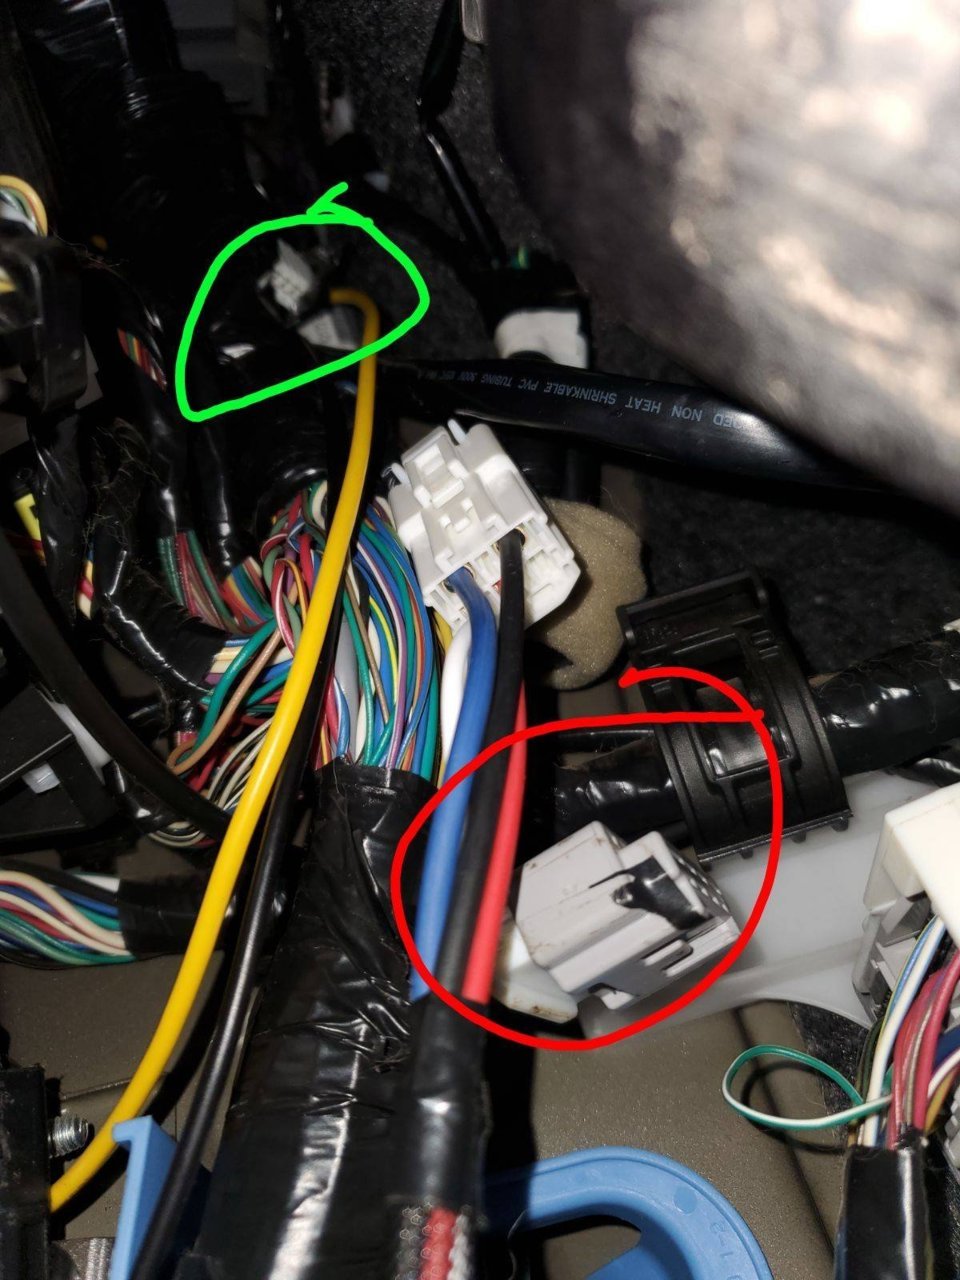 Located the Electronic Brake Controller Plug with Pics (2nd Gen 2015OR)